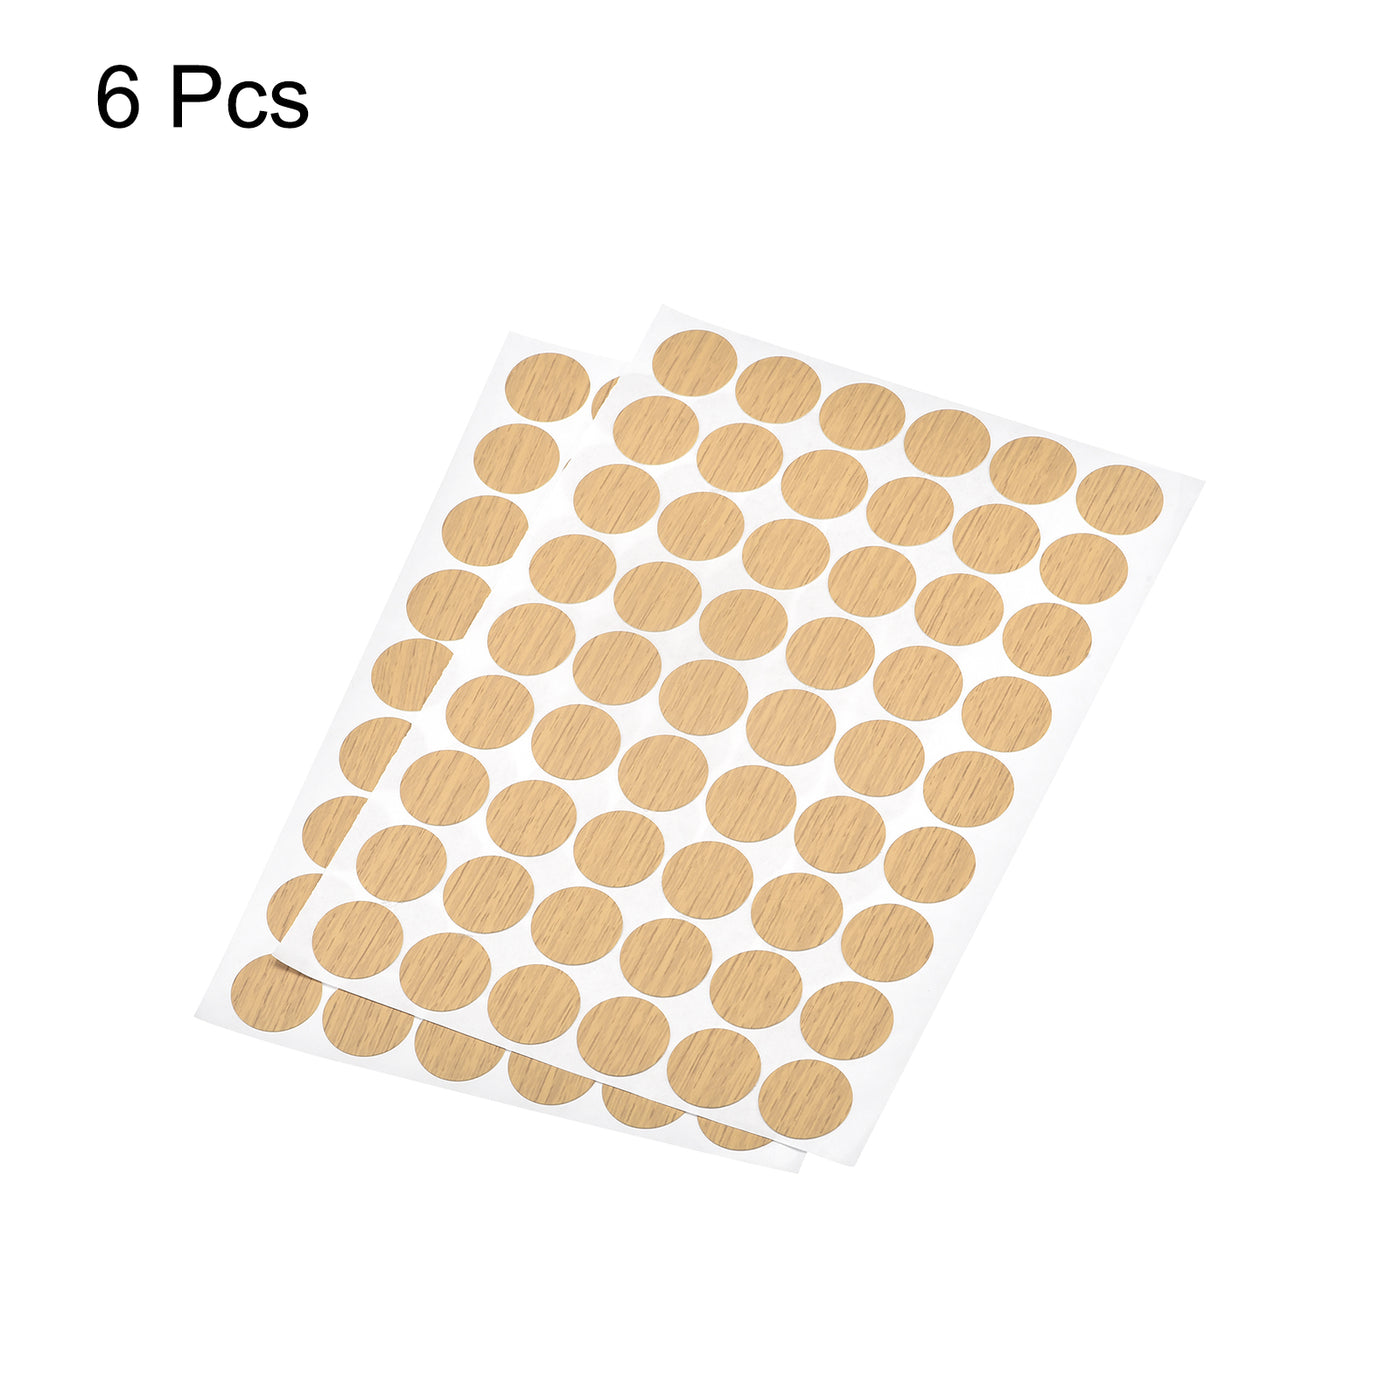 uxcell Uxcell Screw Hole Cover Stickers, 21mm Dia PVC Self Adhesive Covers Caps for Wood Furniture Cabinet Shelf Wardrobe, Maple 6 Sheet/324pcs